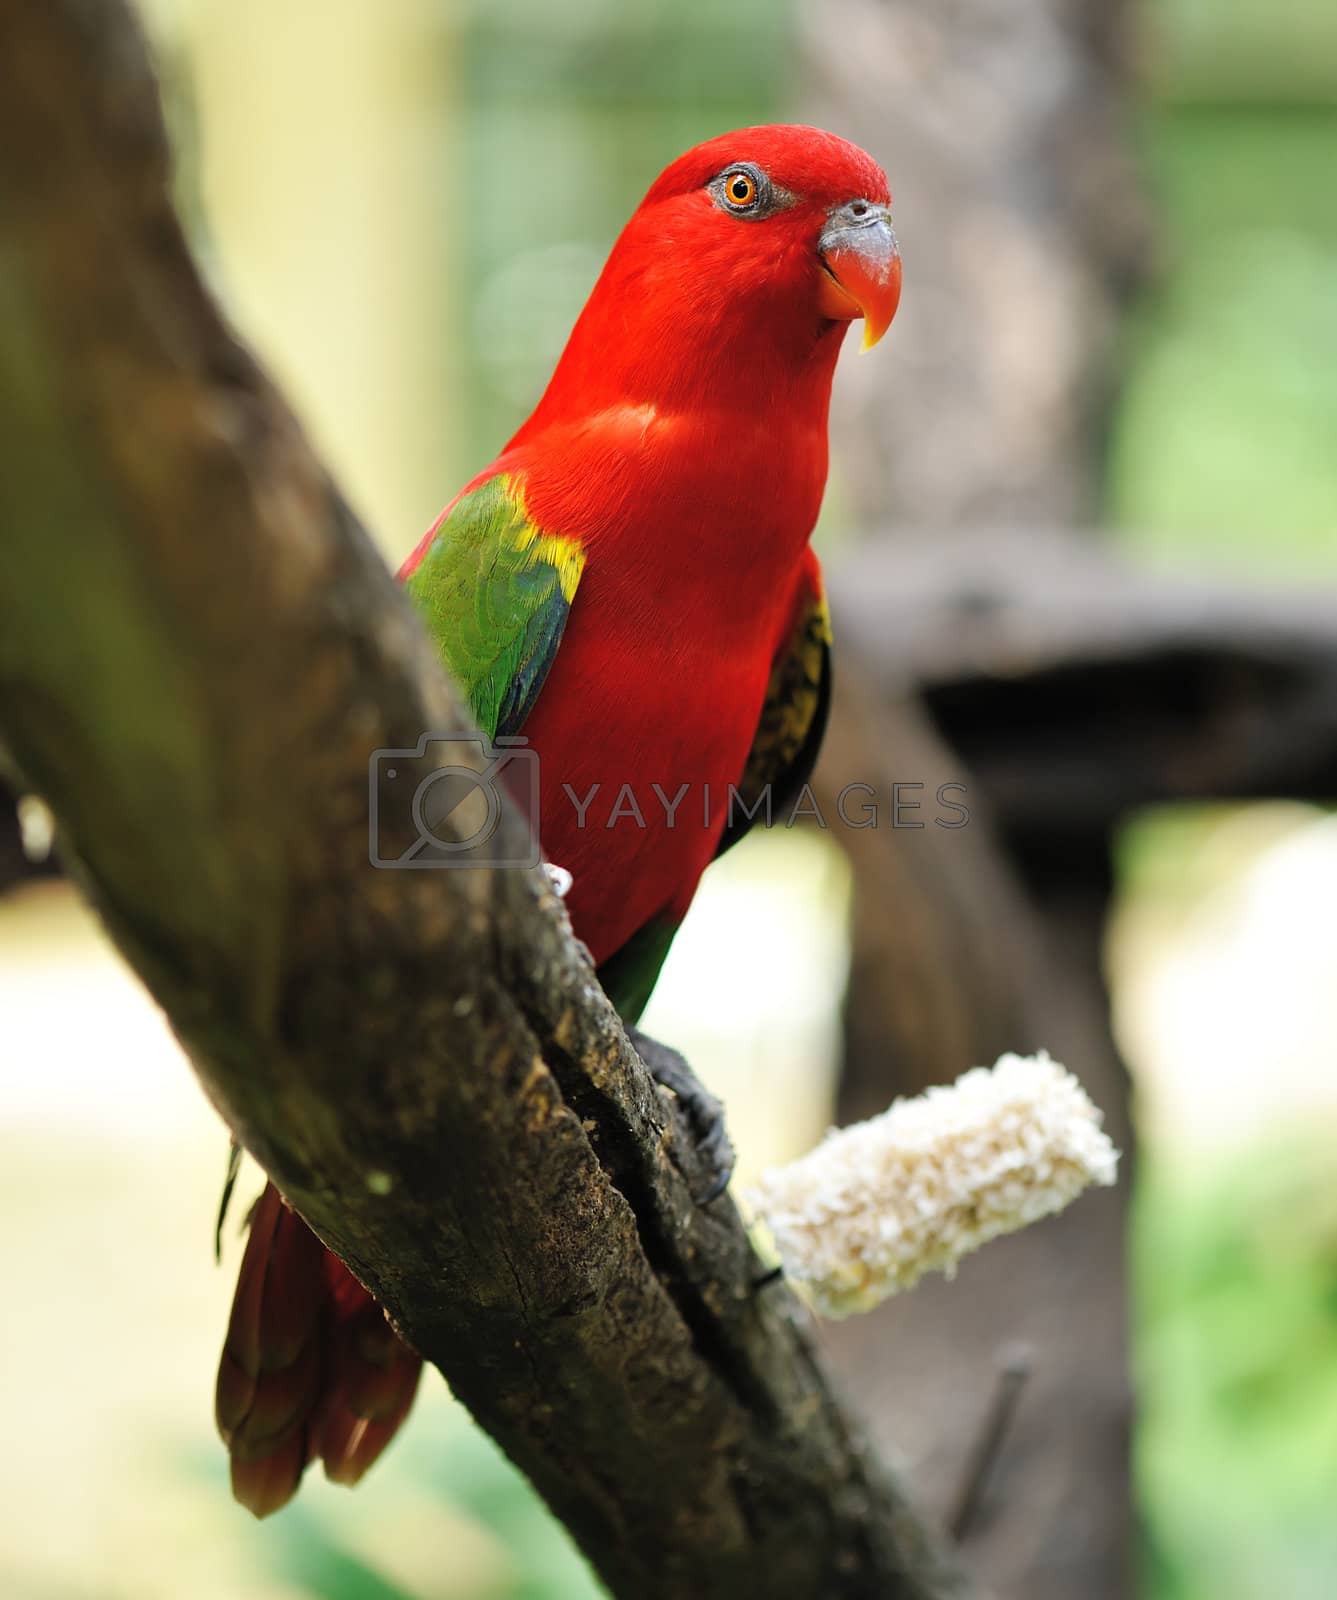 Royalty free image of Parrot bird by haveseen